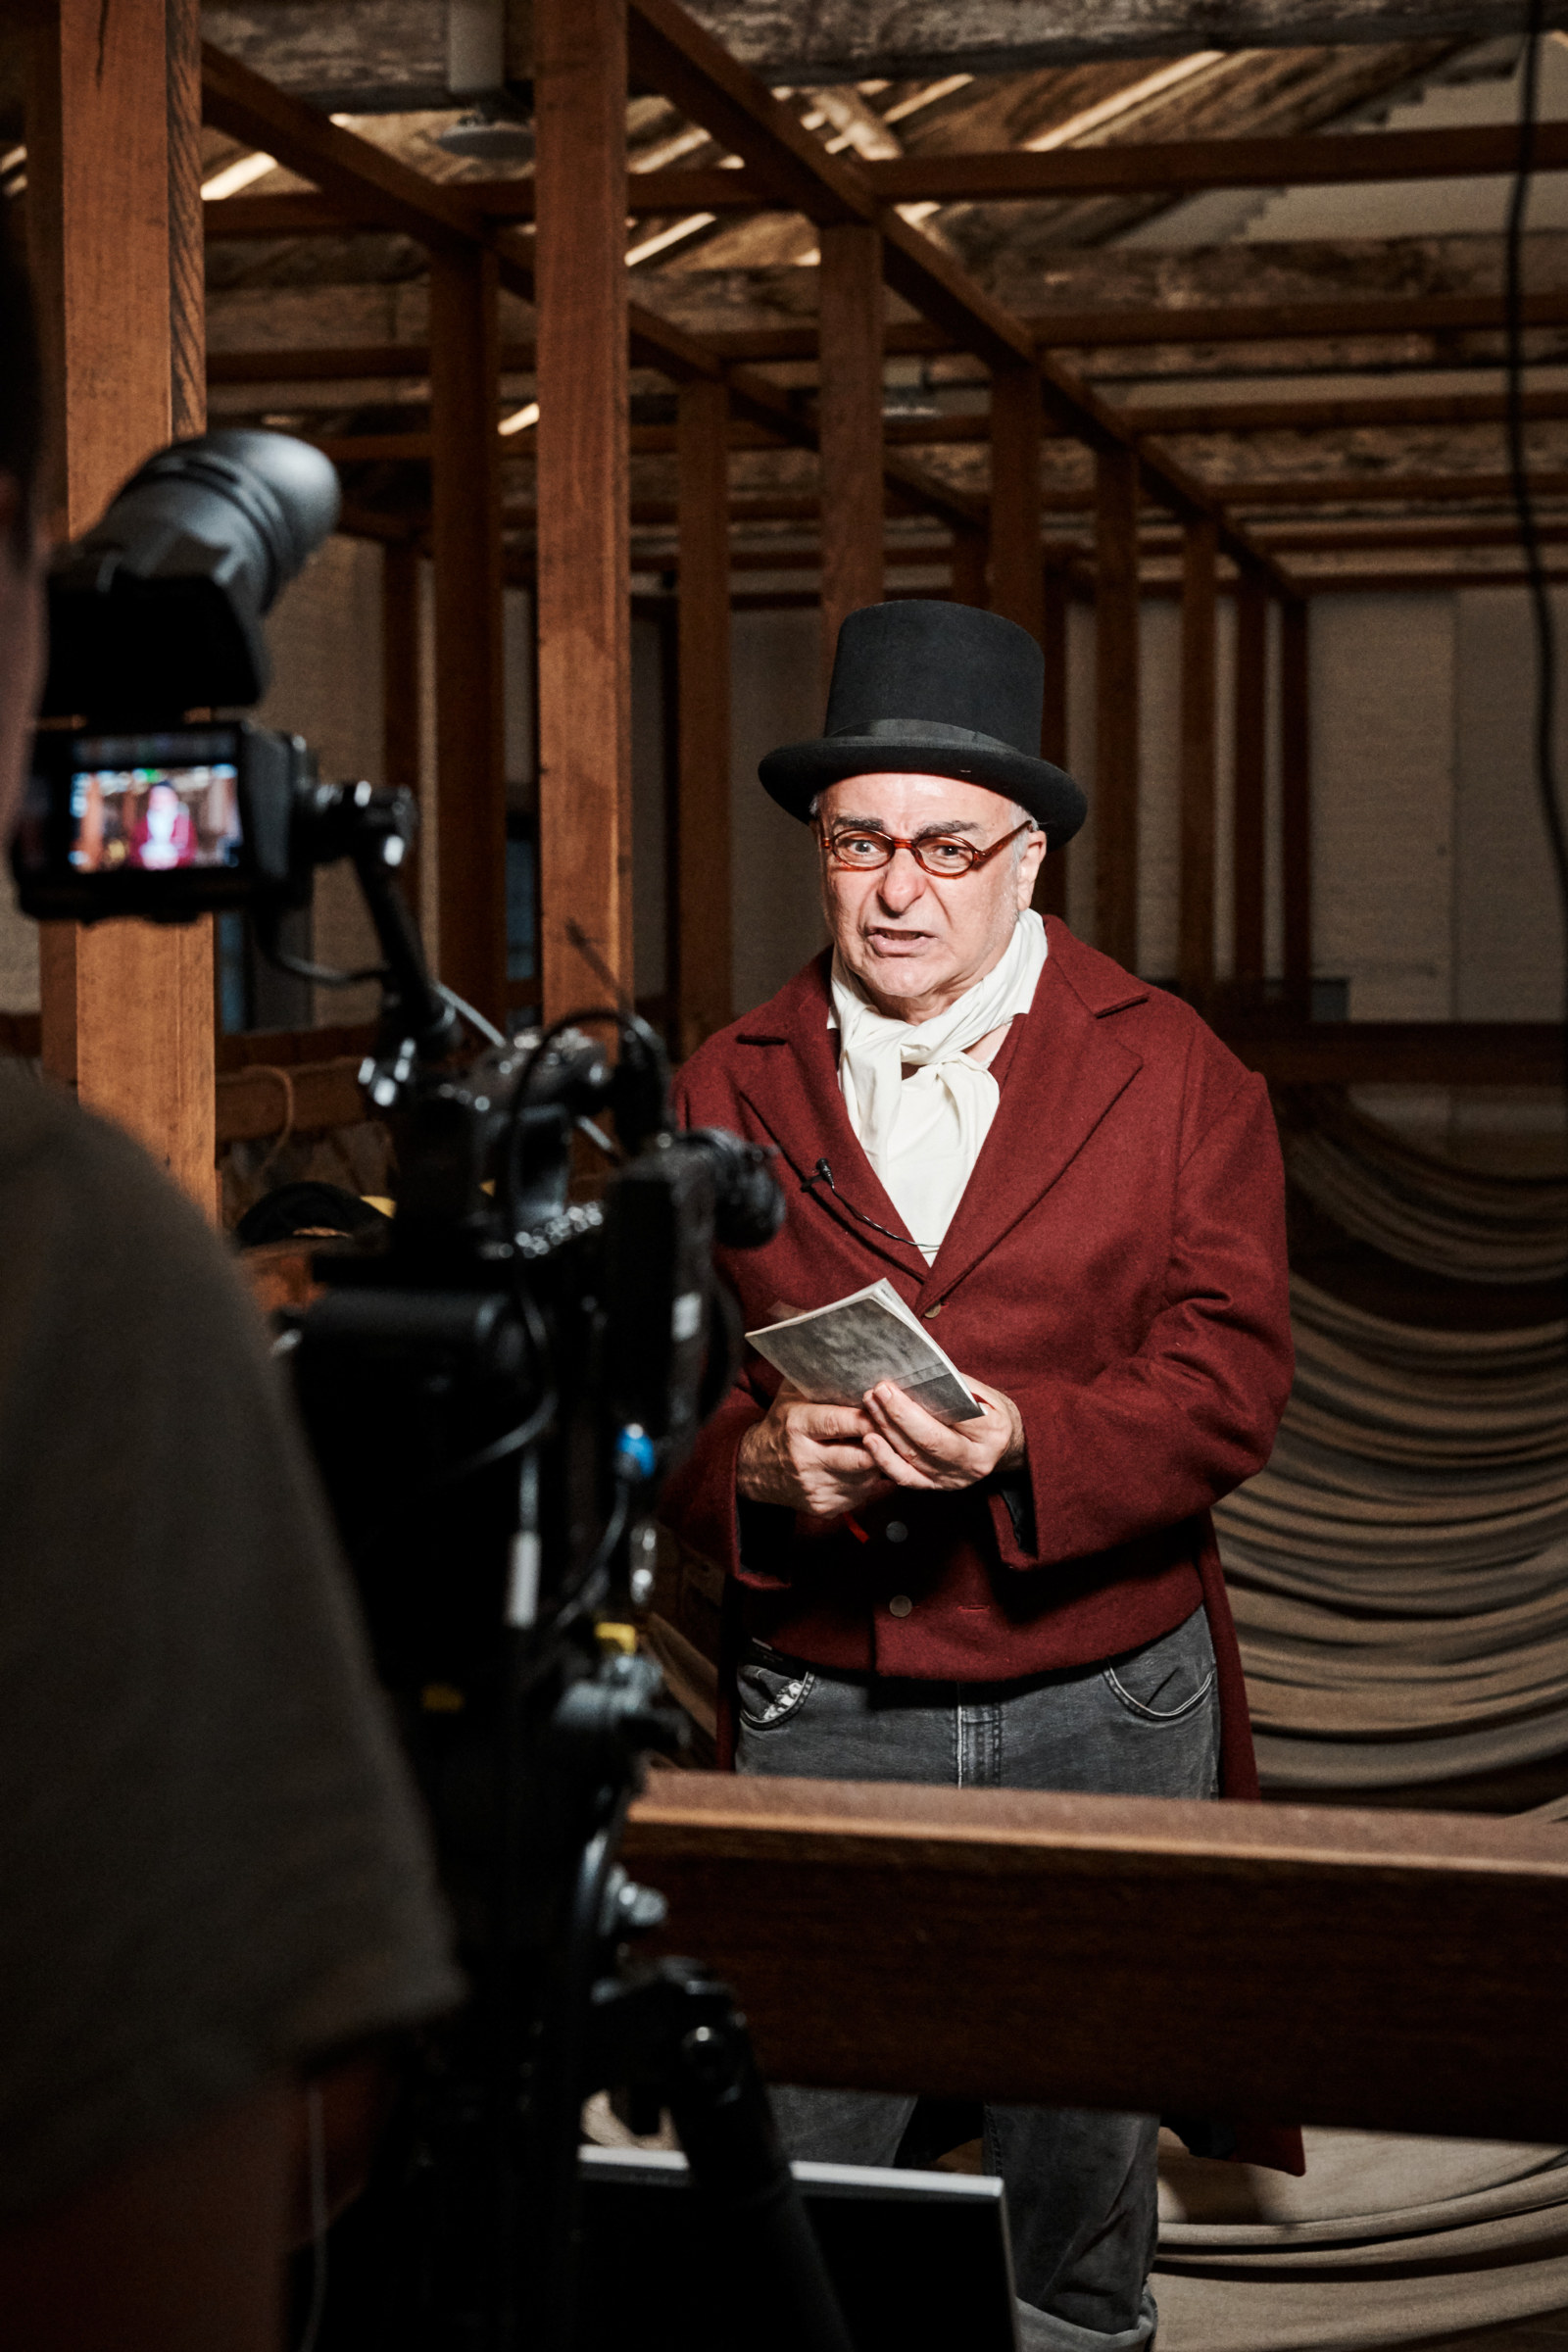 A Curriculum Program Deliverer performs as a costumed character in front of a camera in the hammocks room.